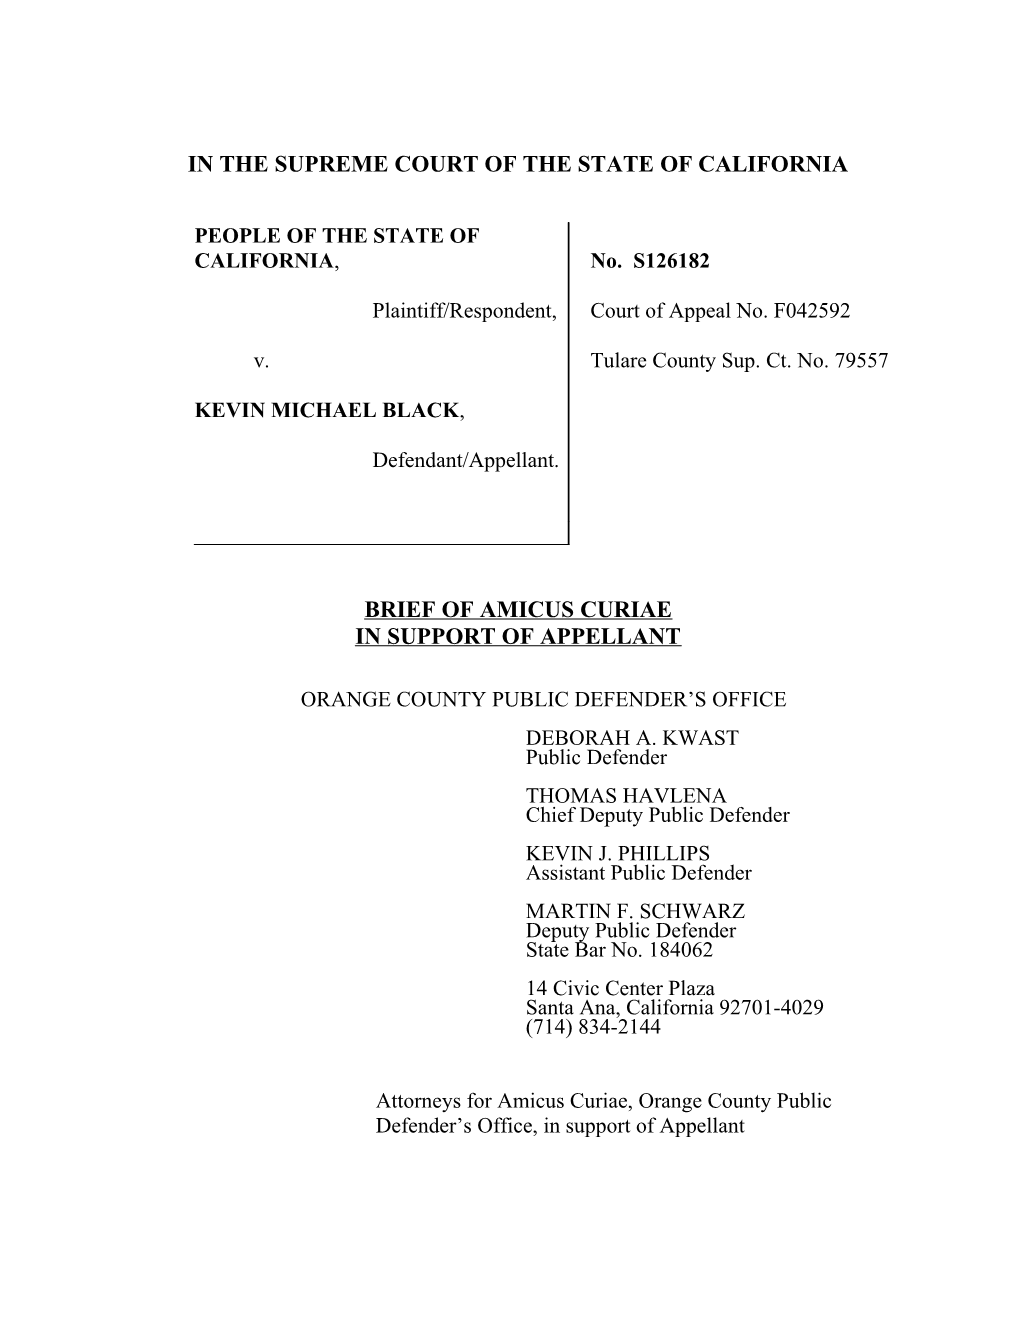 In the Court of Appeal of the State of California s2